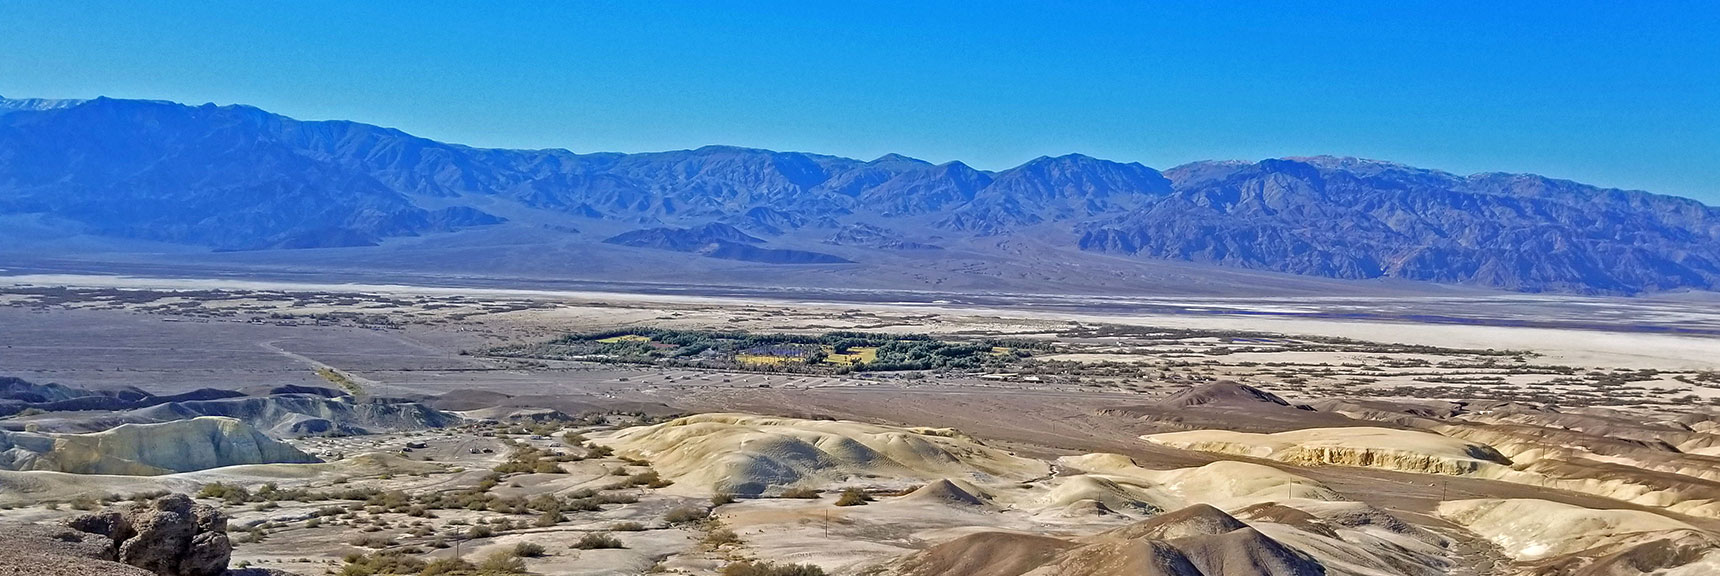 Return Route Will Skirt Right Side of Golden Hill Triangle Below (center). | Tea House & Table Rock Circuit | Furnace Creek | Death Valley National Park, California